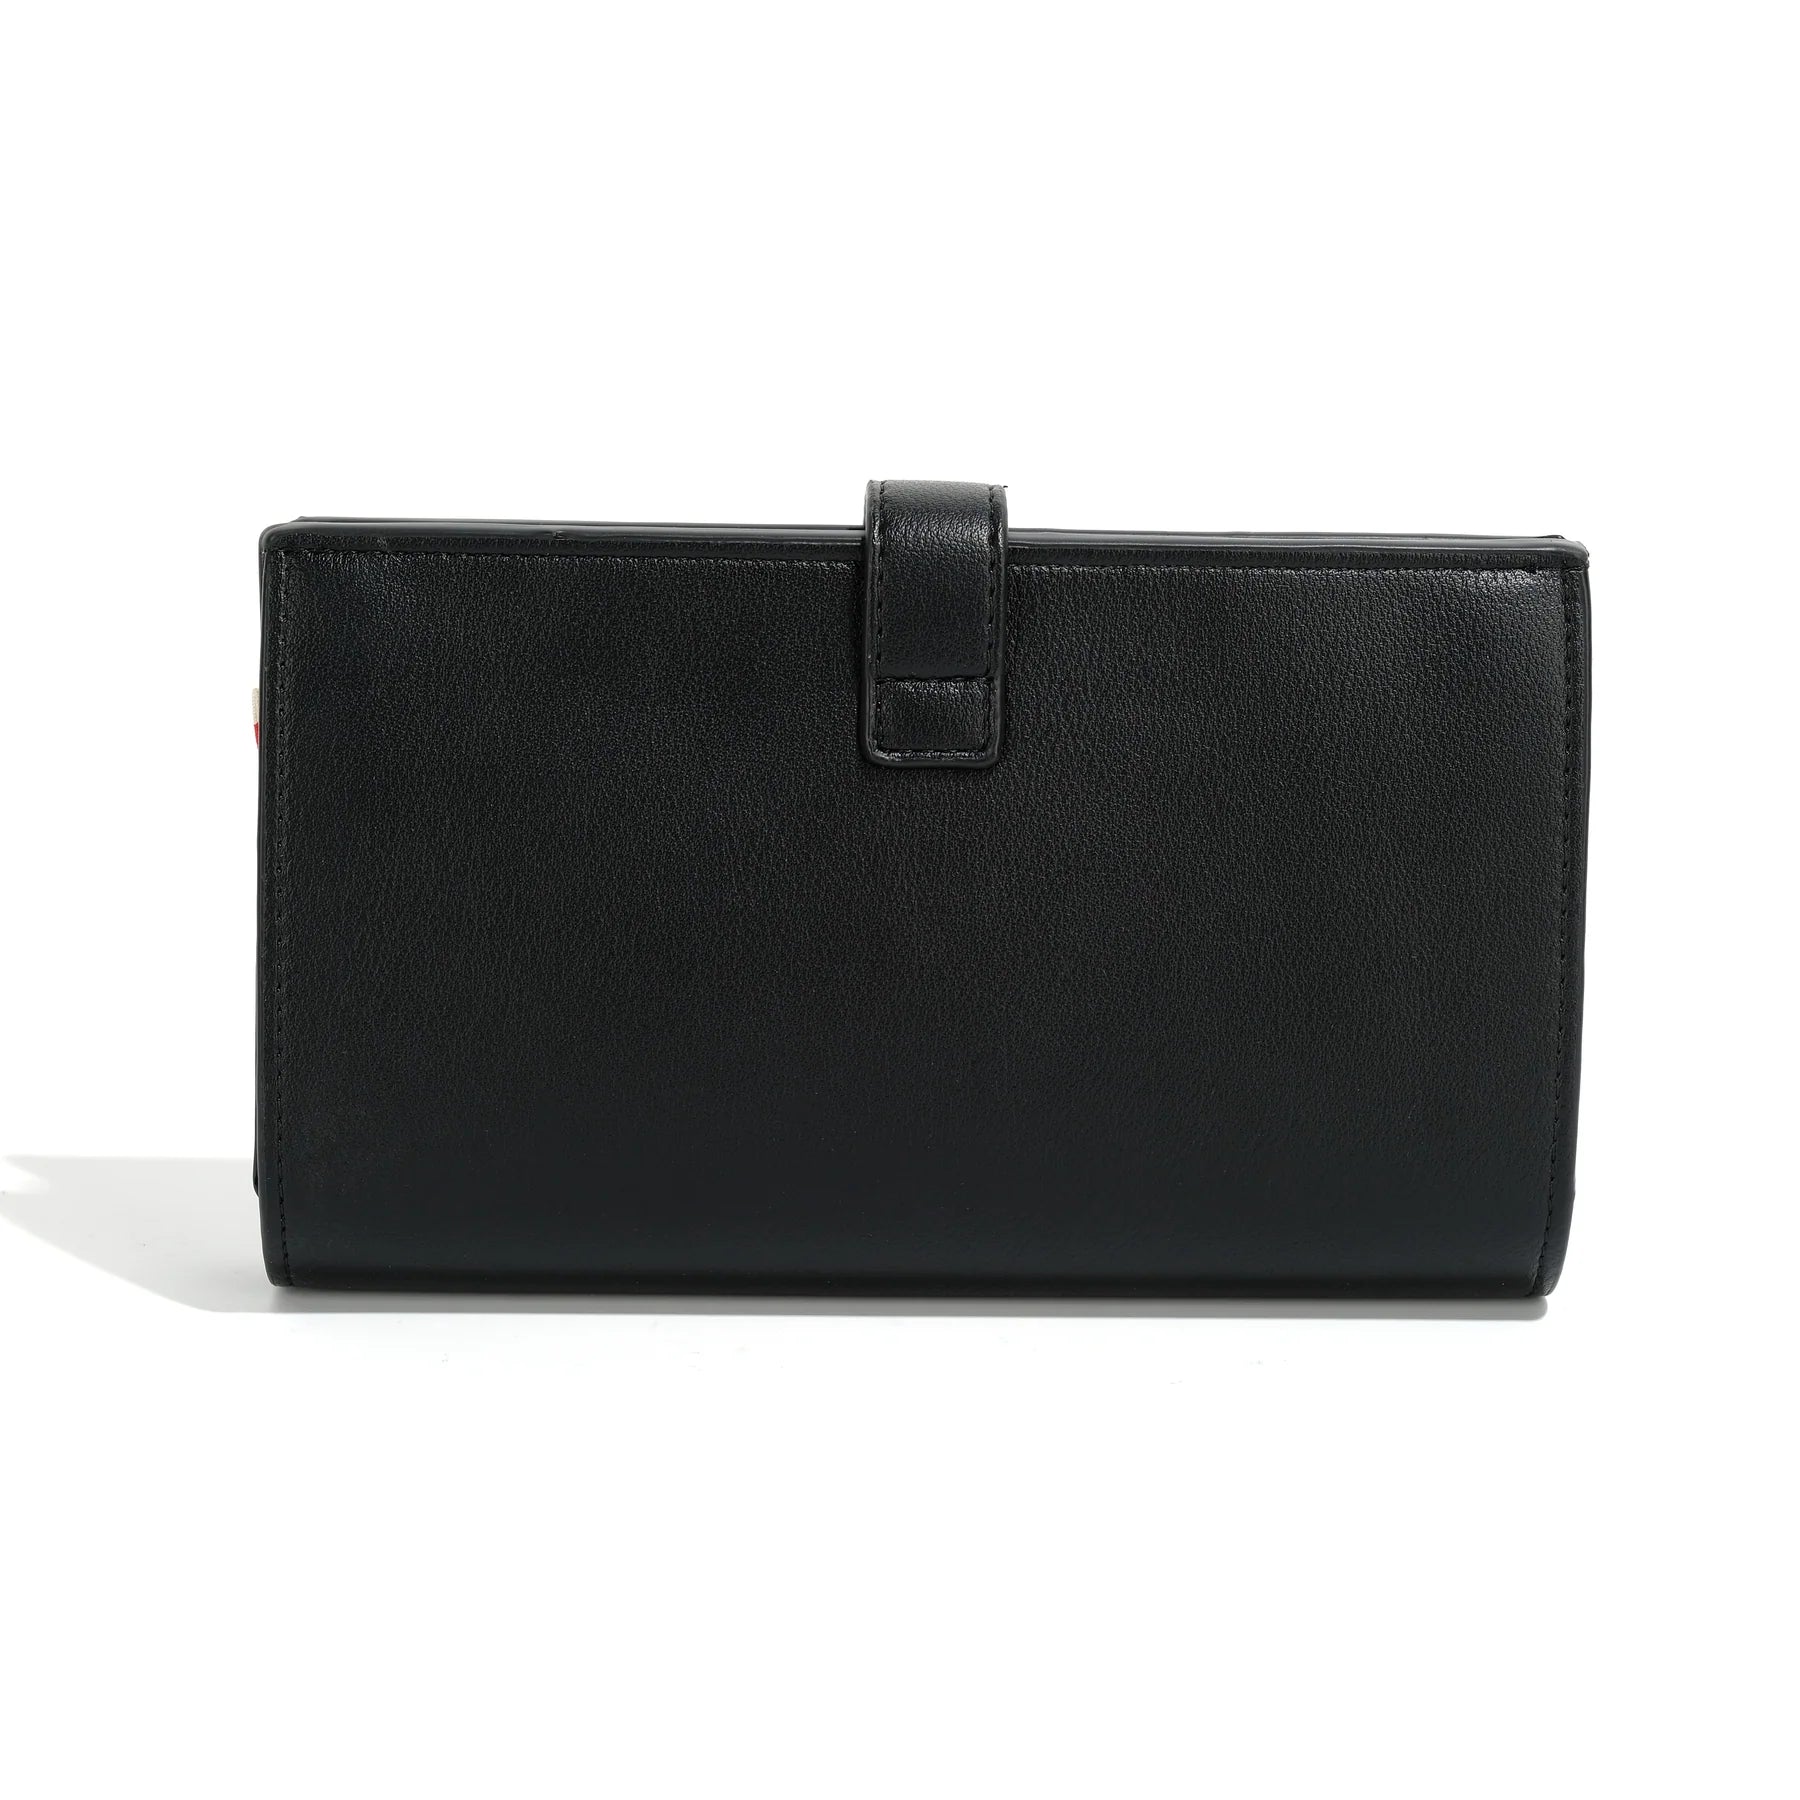 NELL LARGE BLACK WALLET Accessories COLAB 